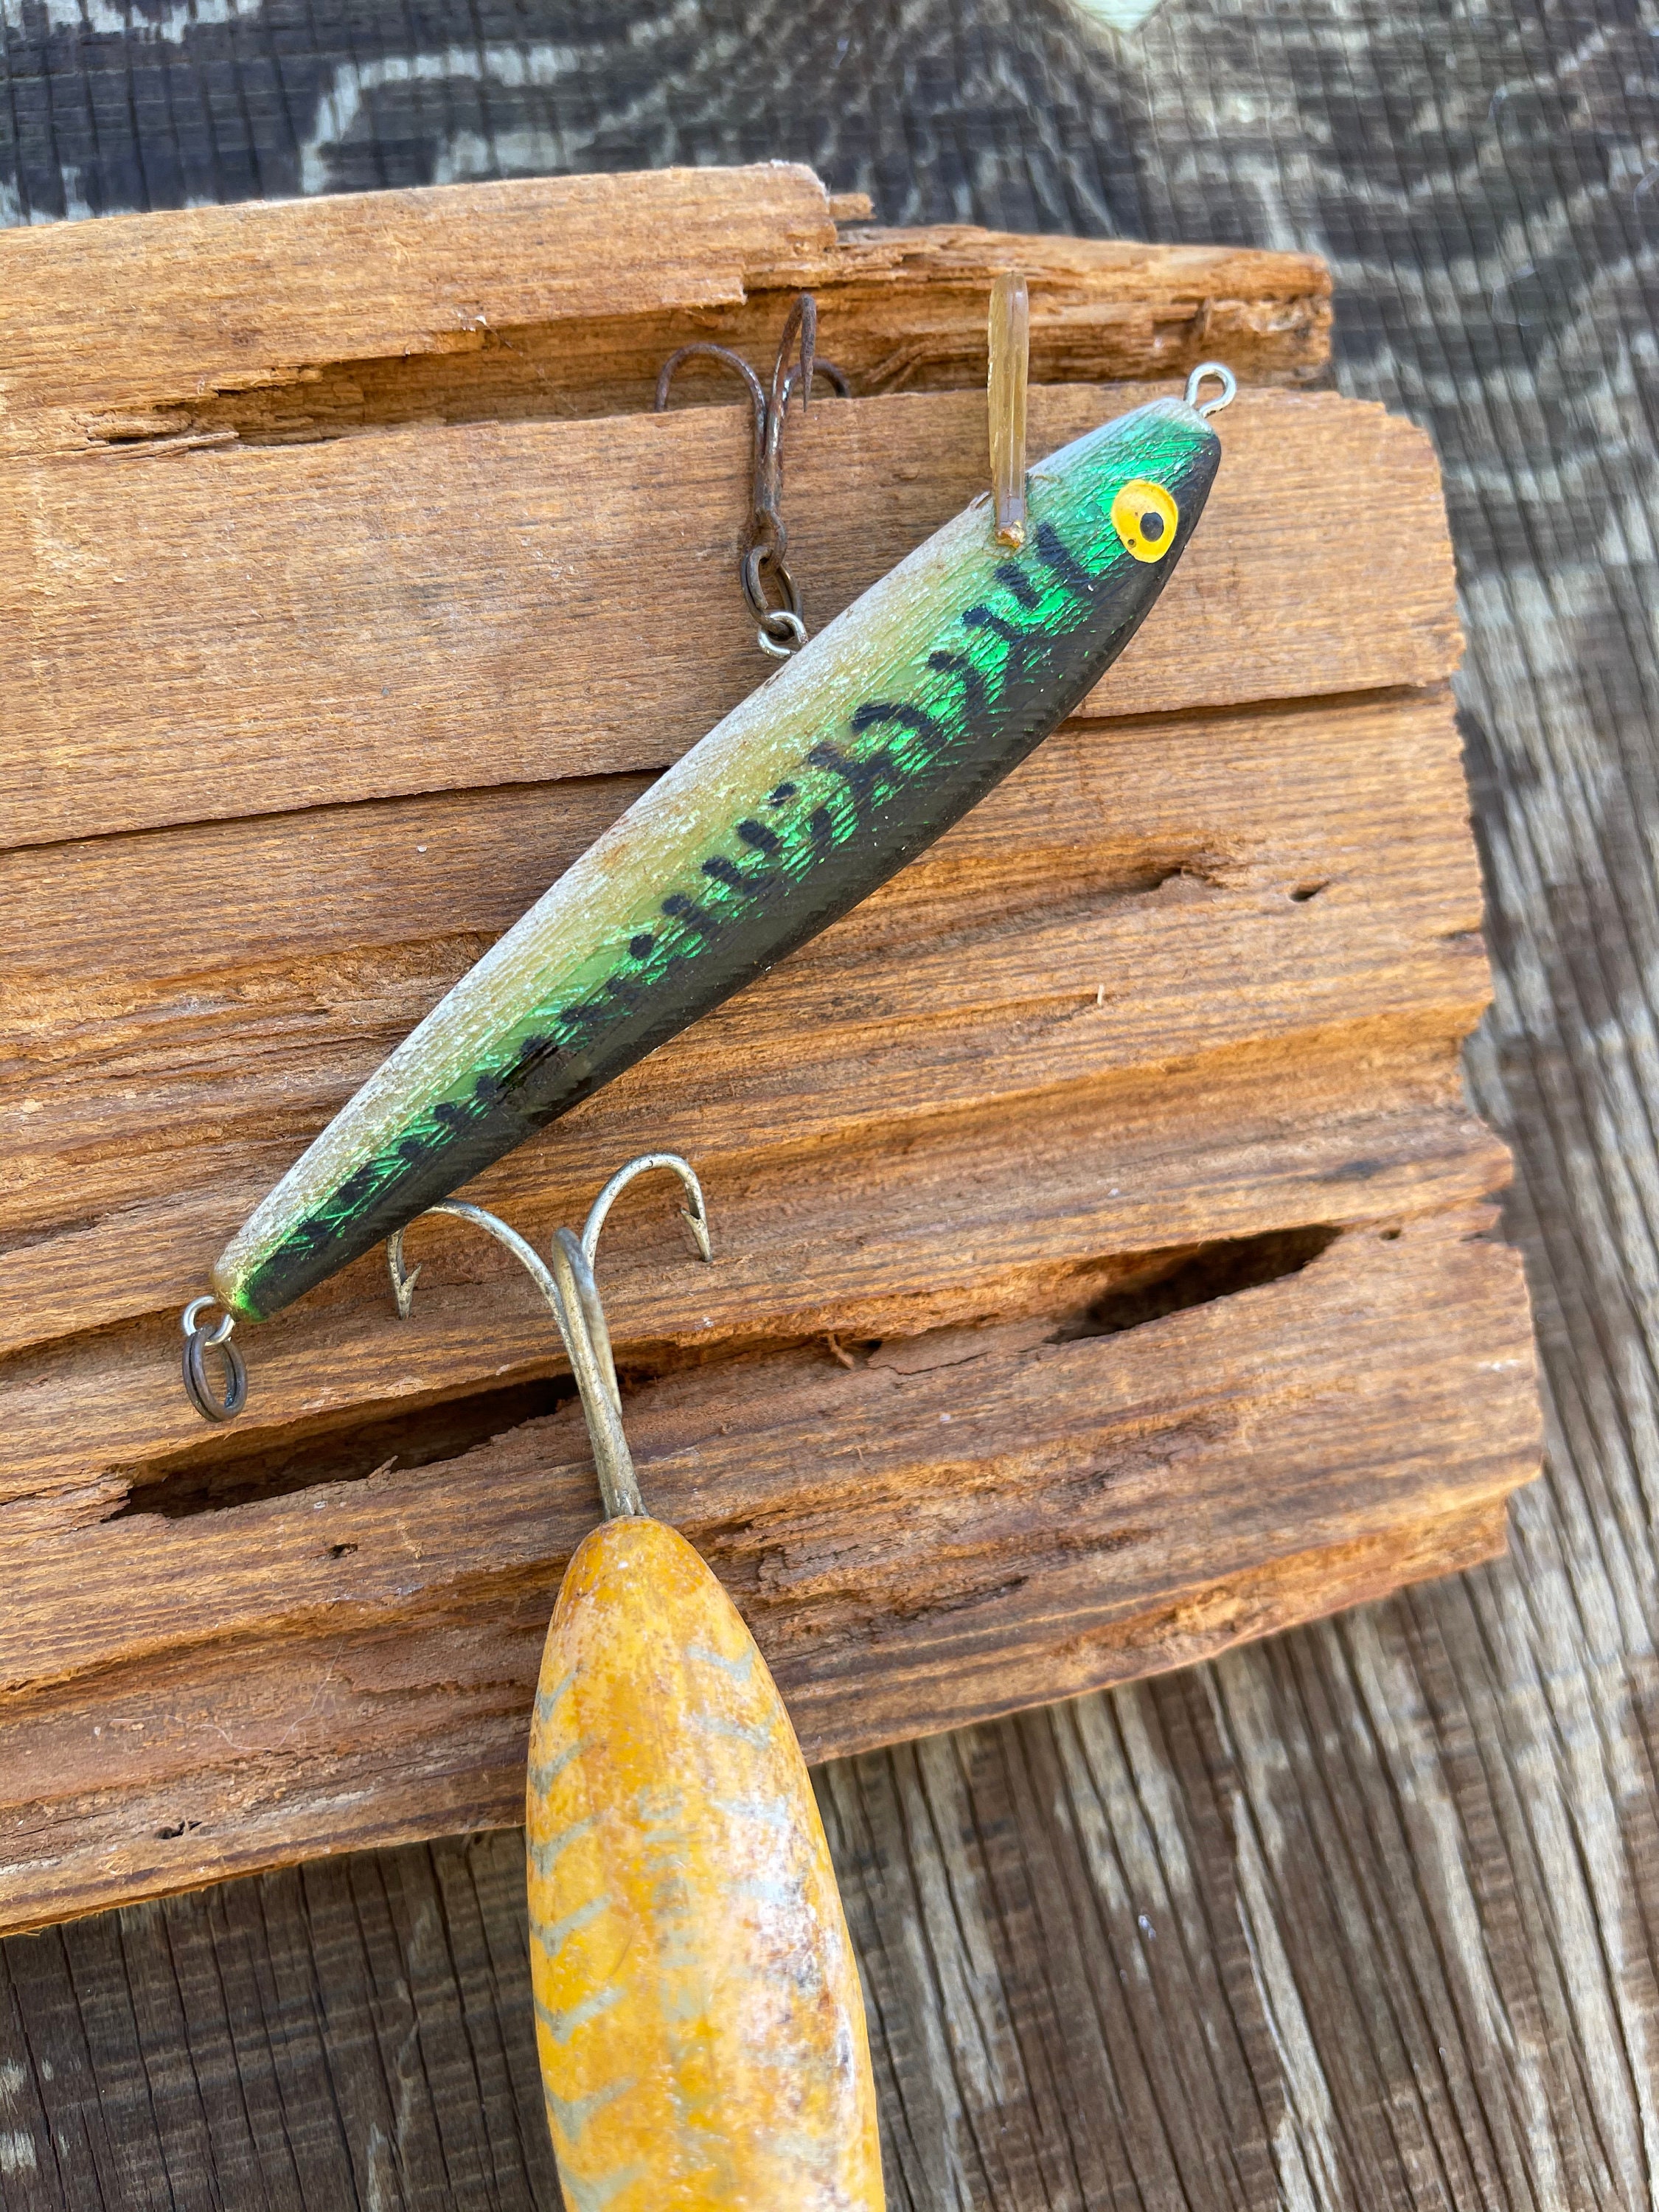 Vintage Fishing Lure Collection, Fishing Lure, Outdoors, Camping, Cypress  Wood, Fish Hook, Sports, Cabin Decor, Rustic, Man Cave, Gift, 